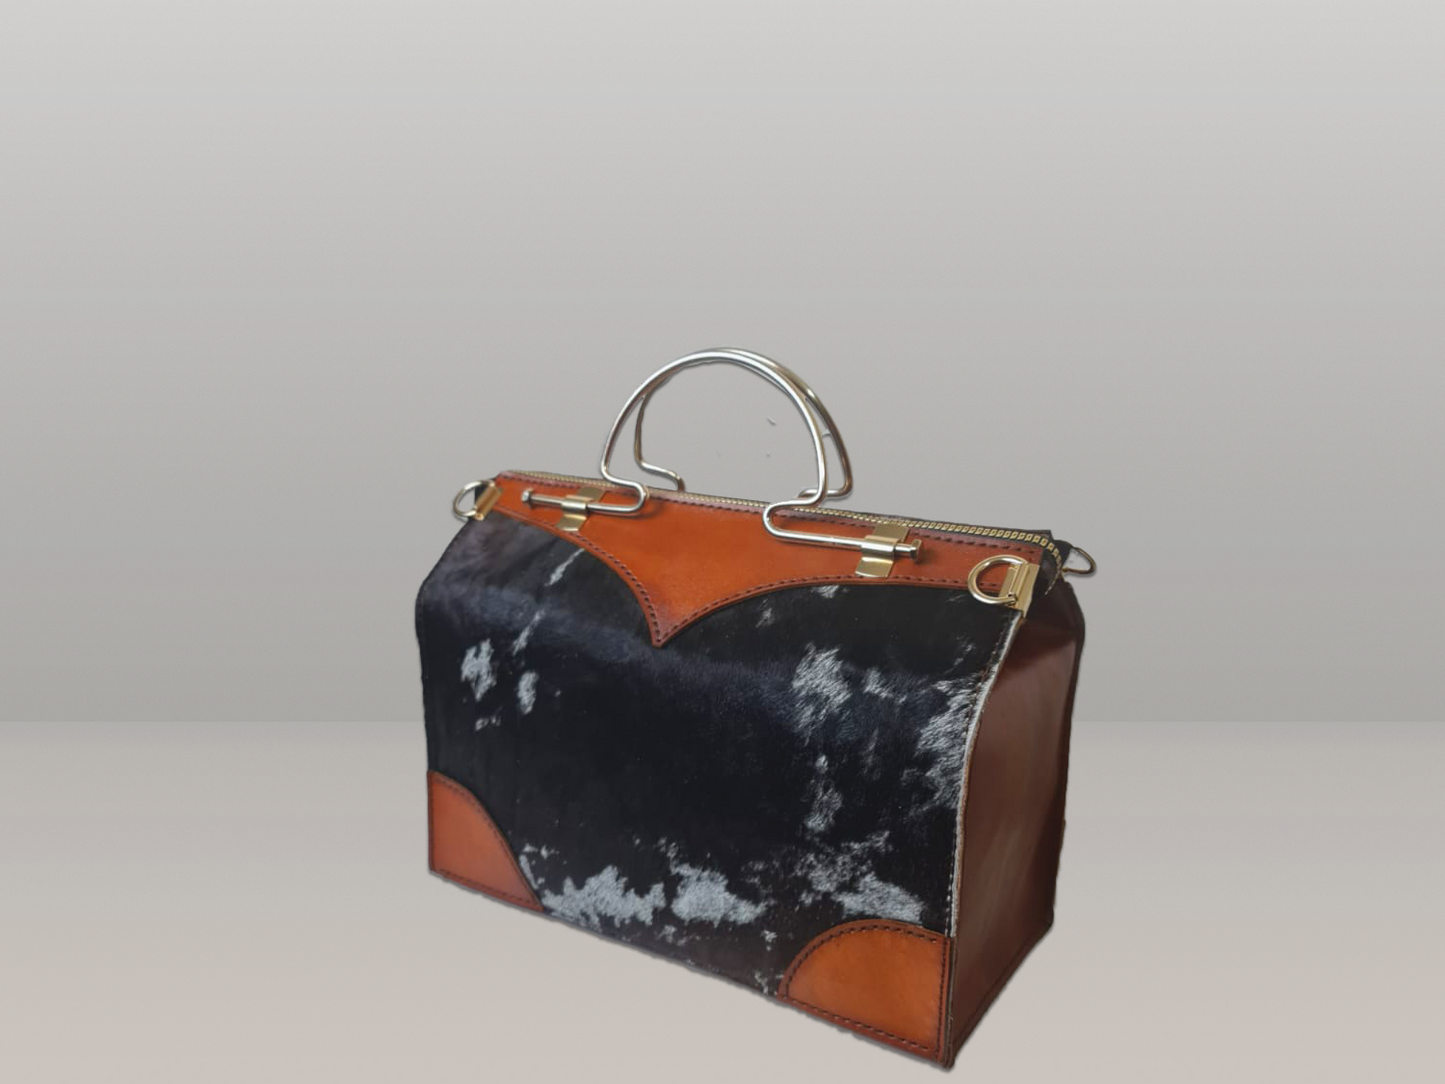 Due tone leather bag with an elegant handle